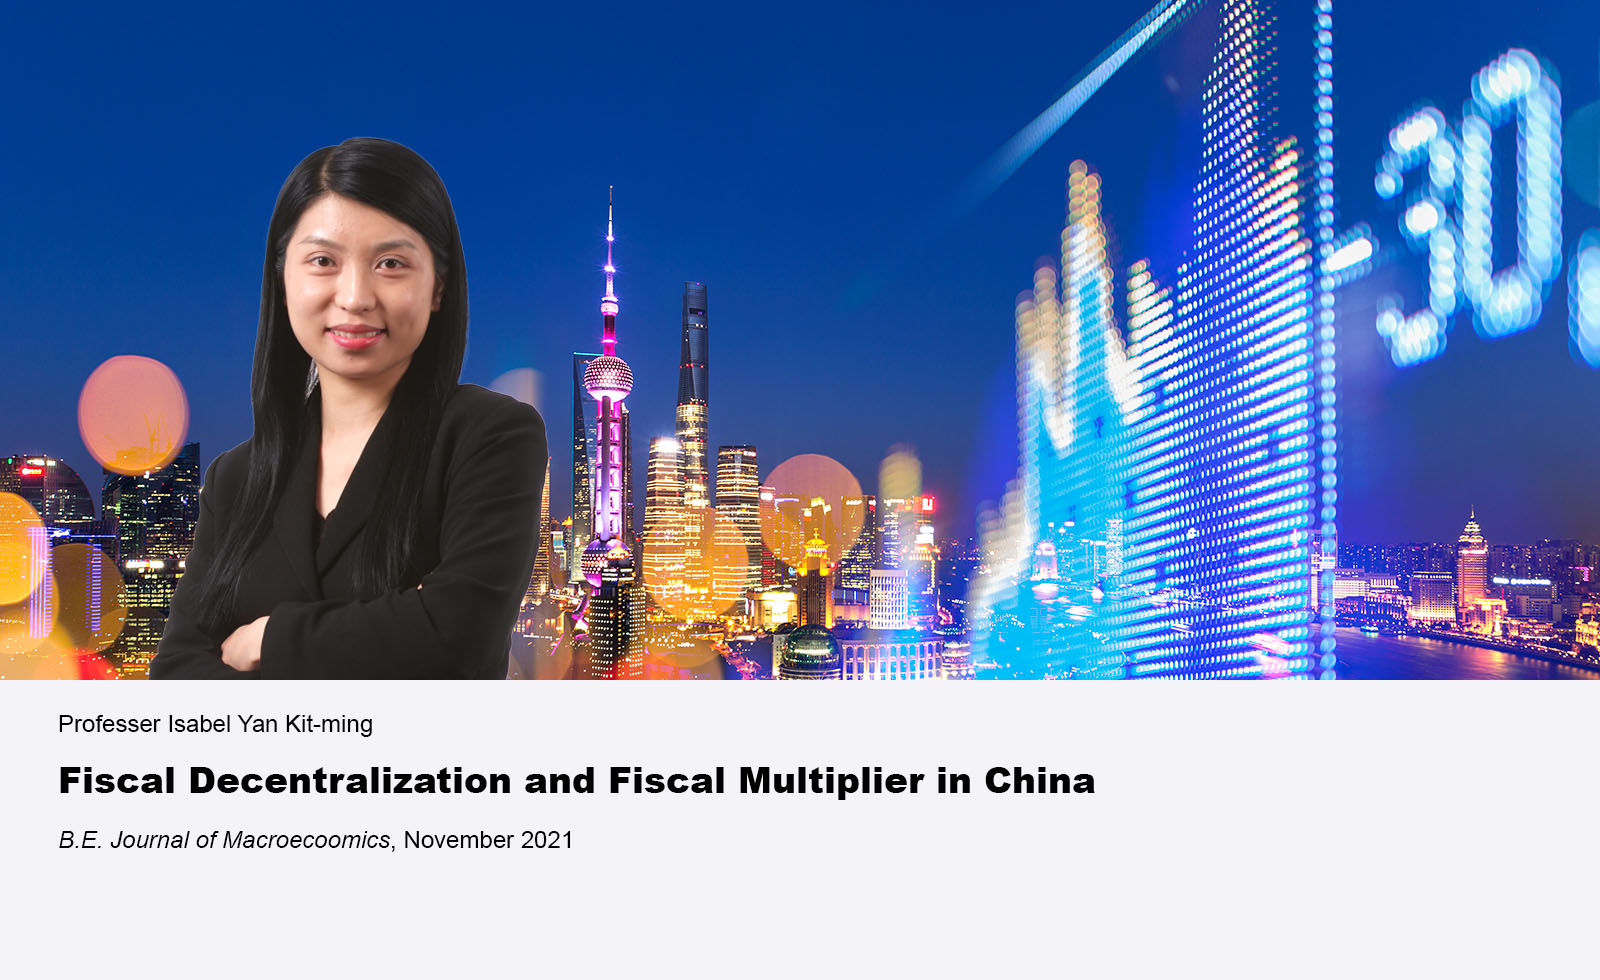 Fiscal Decentralization and Fiscal Multiplier in China